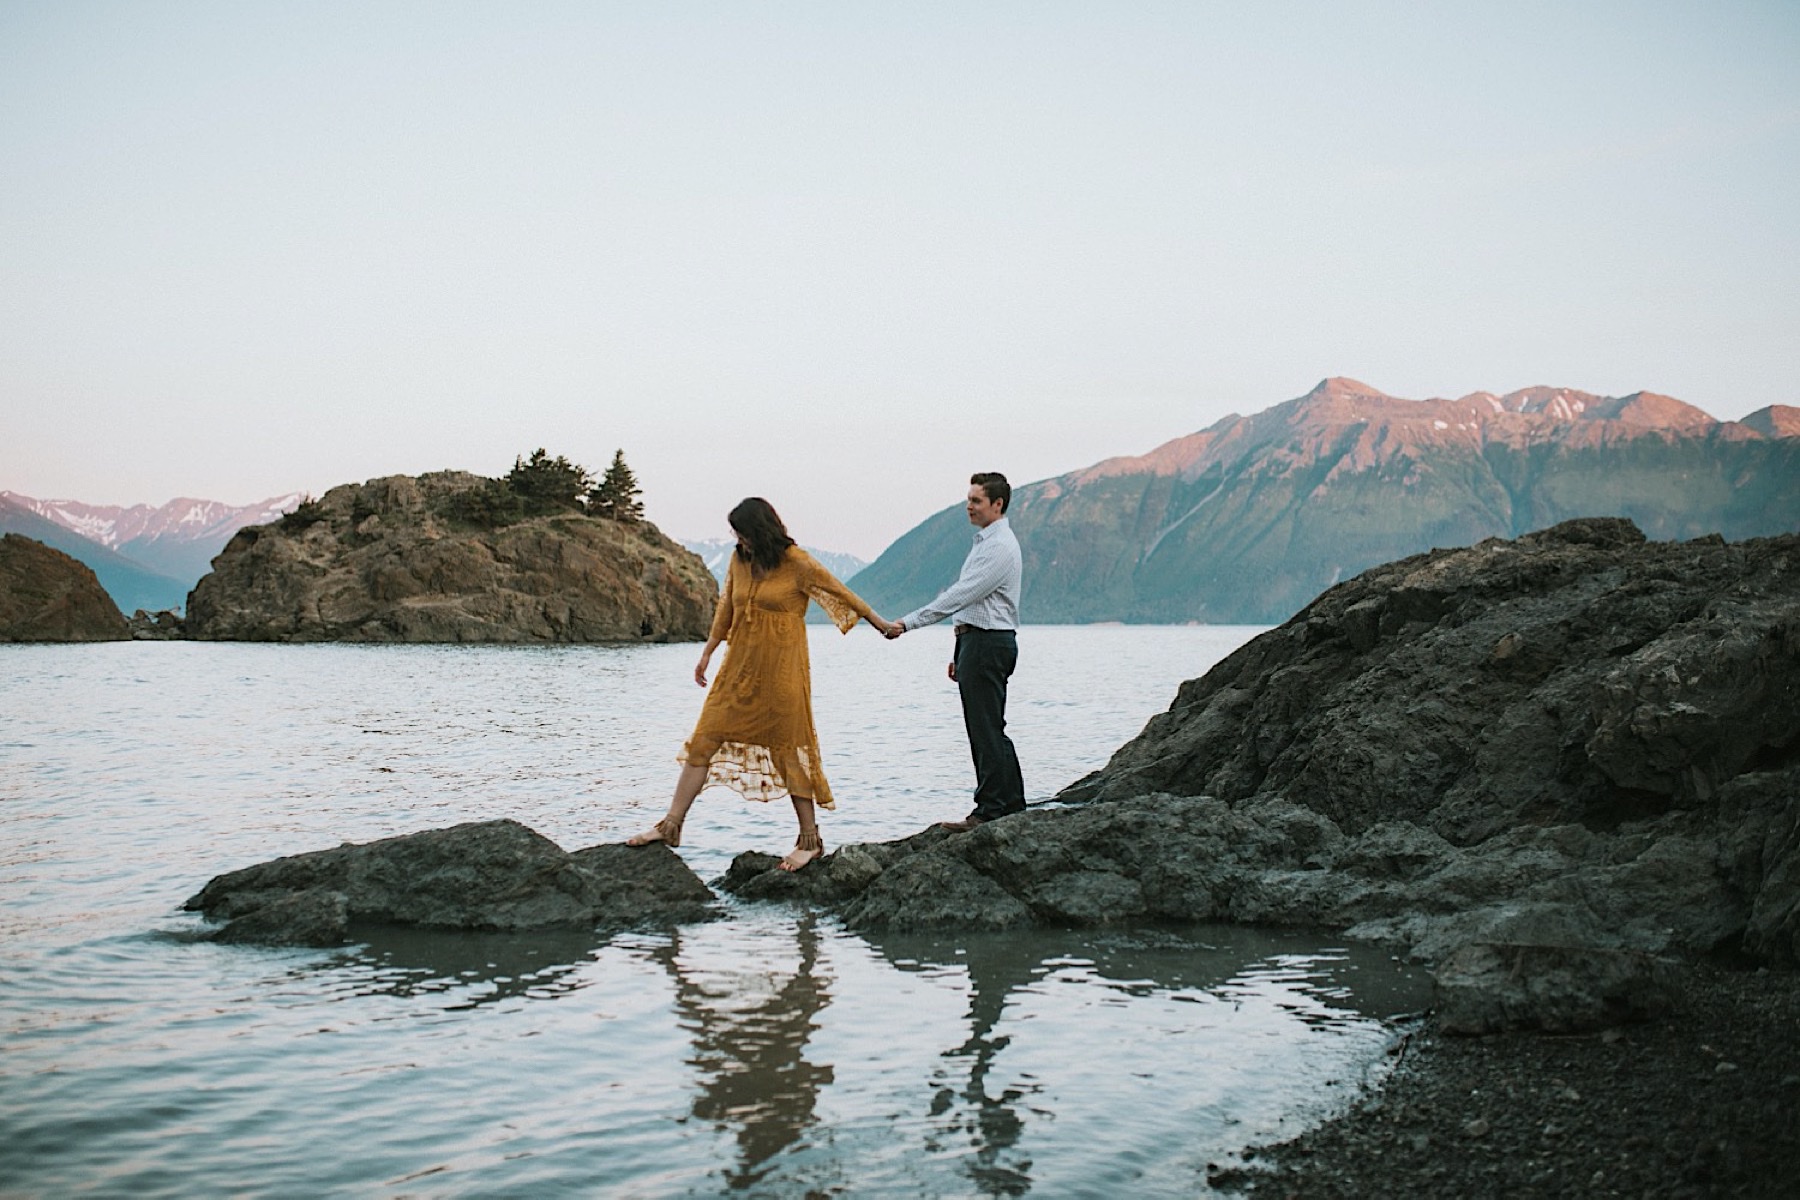 Couple standing on rocks, she is leading him out by the water